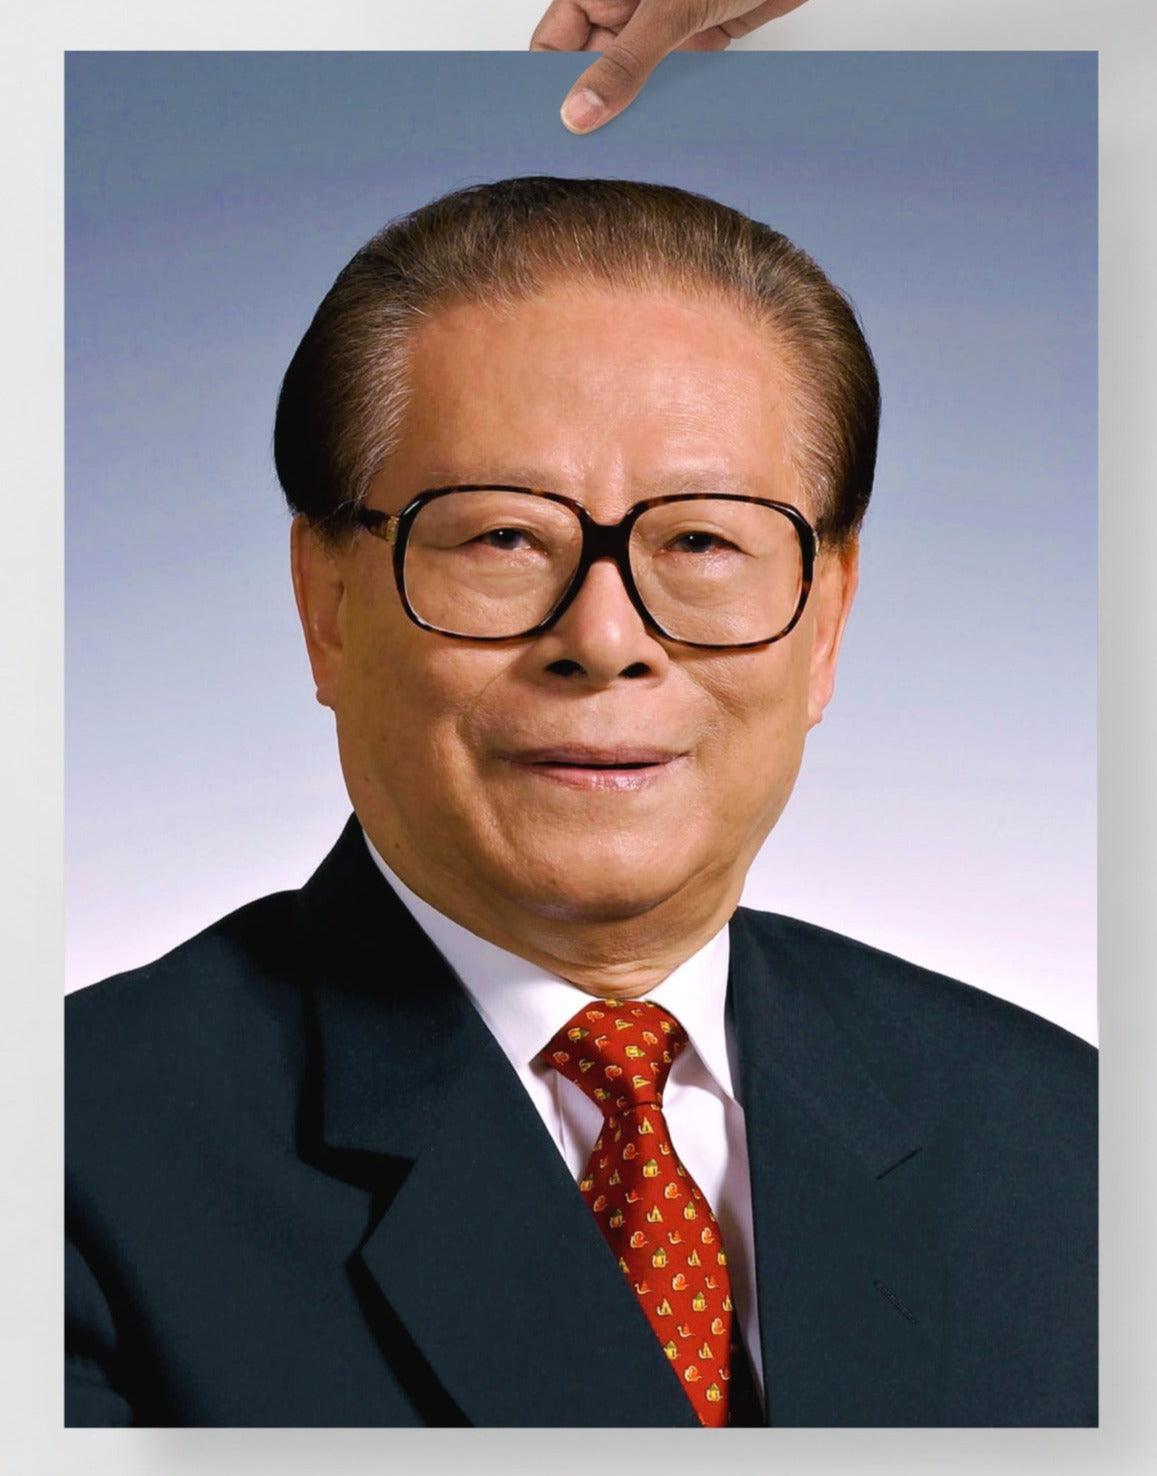 A Jiang Zemin Official Portrait  poster on a plain backdrop in size 18x24”.